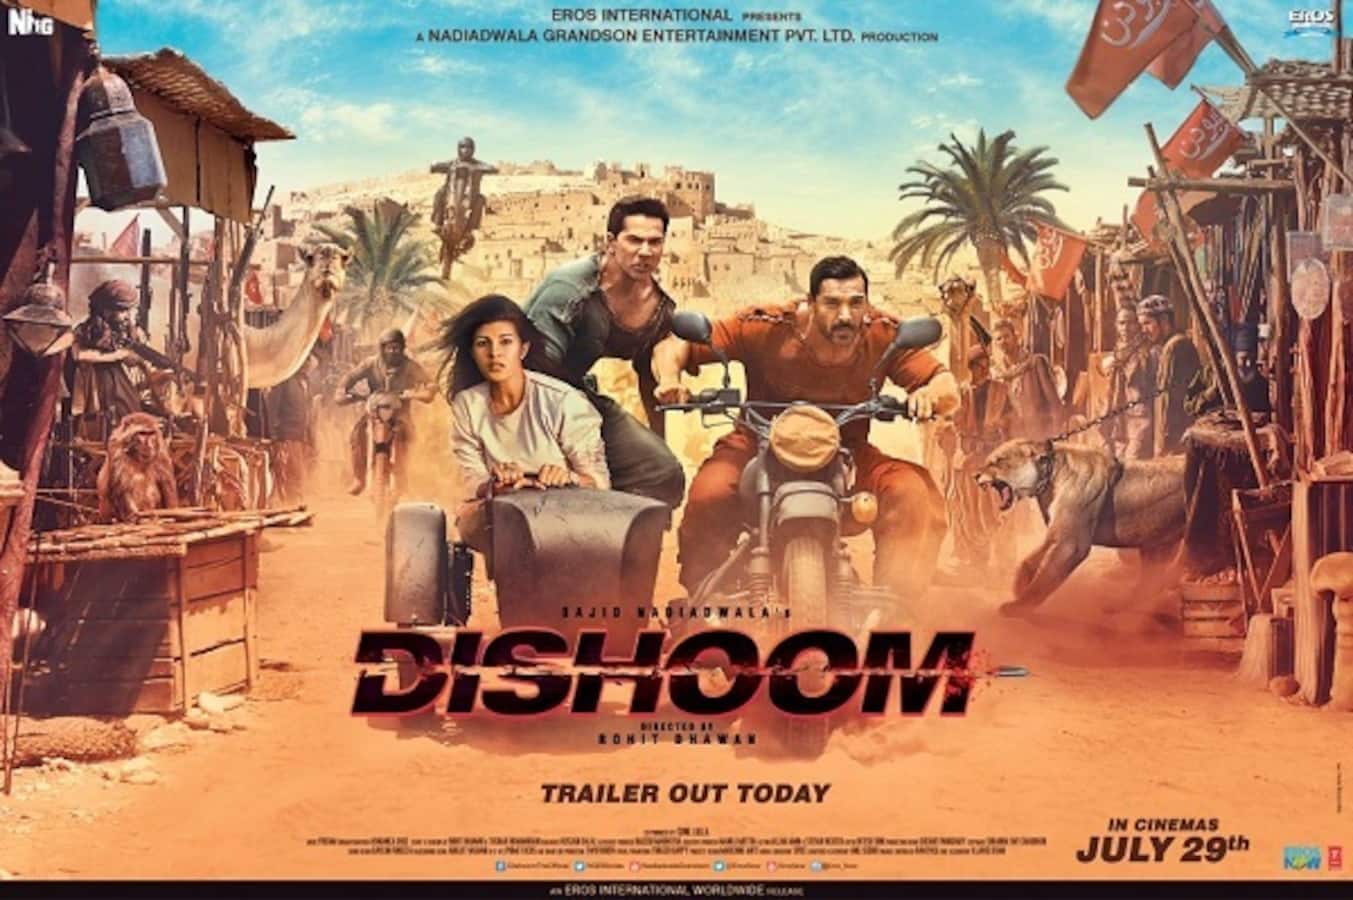 5 Dialogues From John Abraham Varun Dhawan’s Dishoom Trailer That Have Us Stoked For The Action